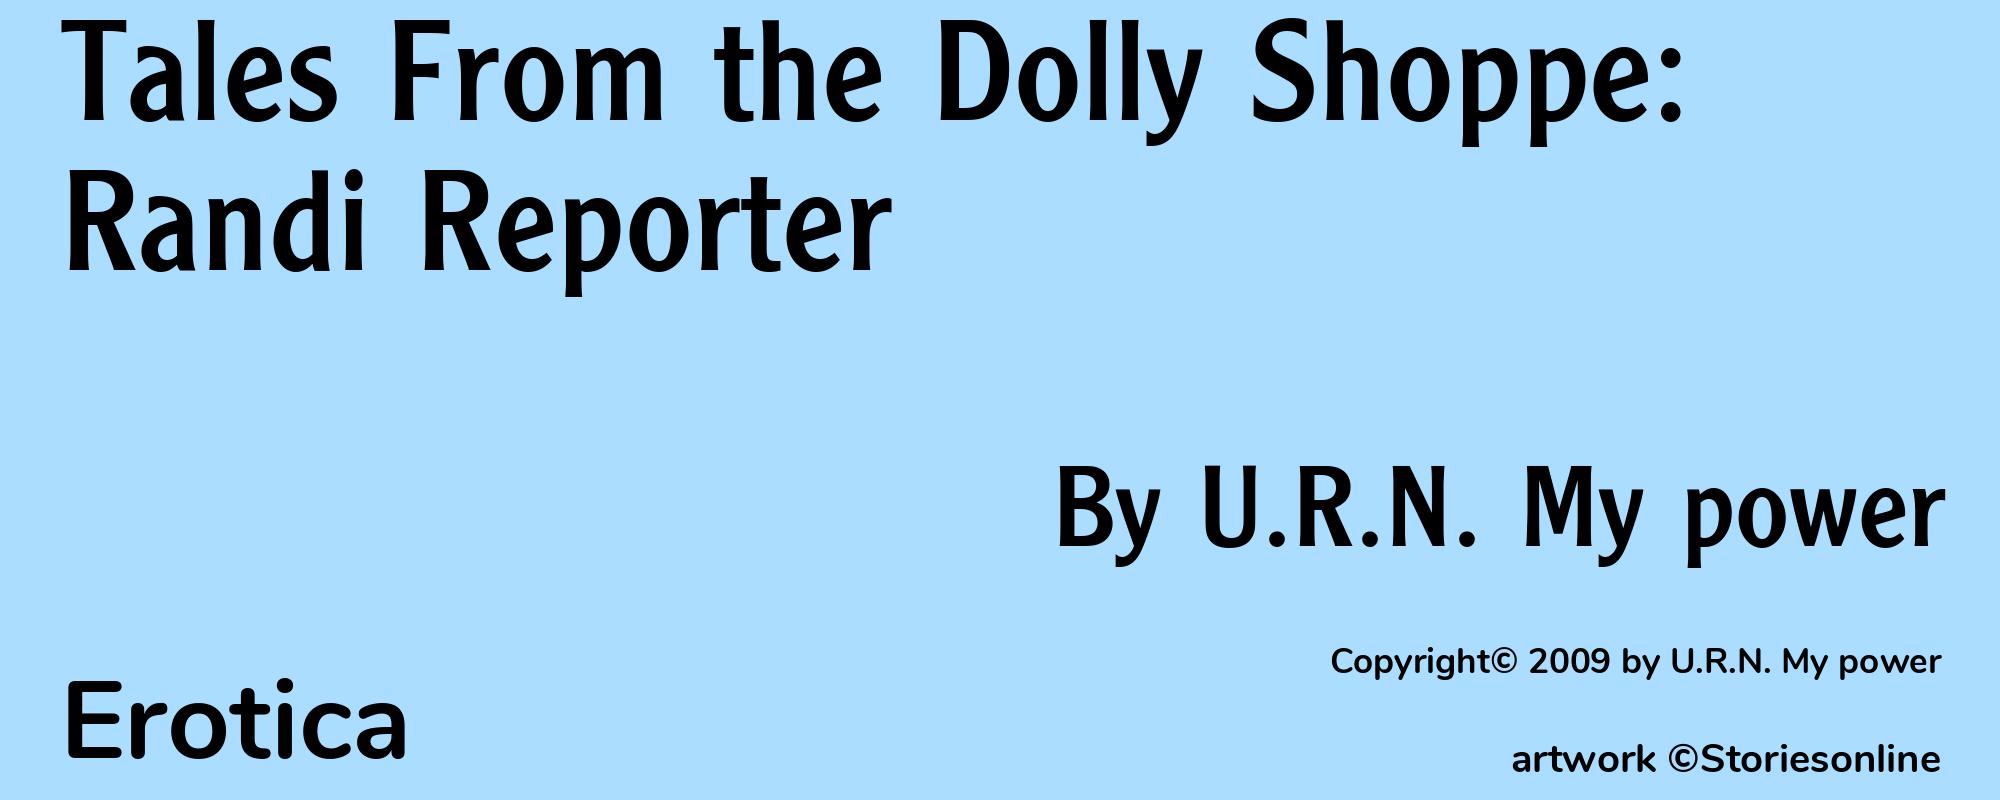 Tales From the Dolly Shoppe: Randi Reporter - Cover